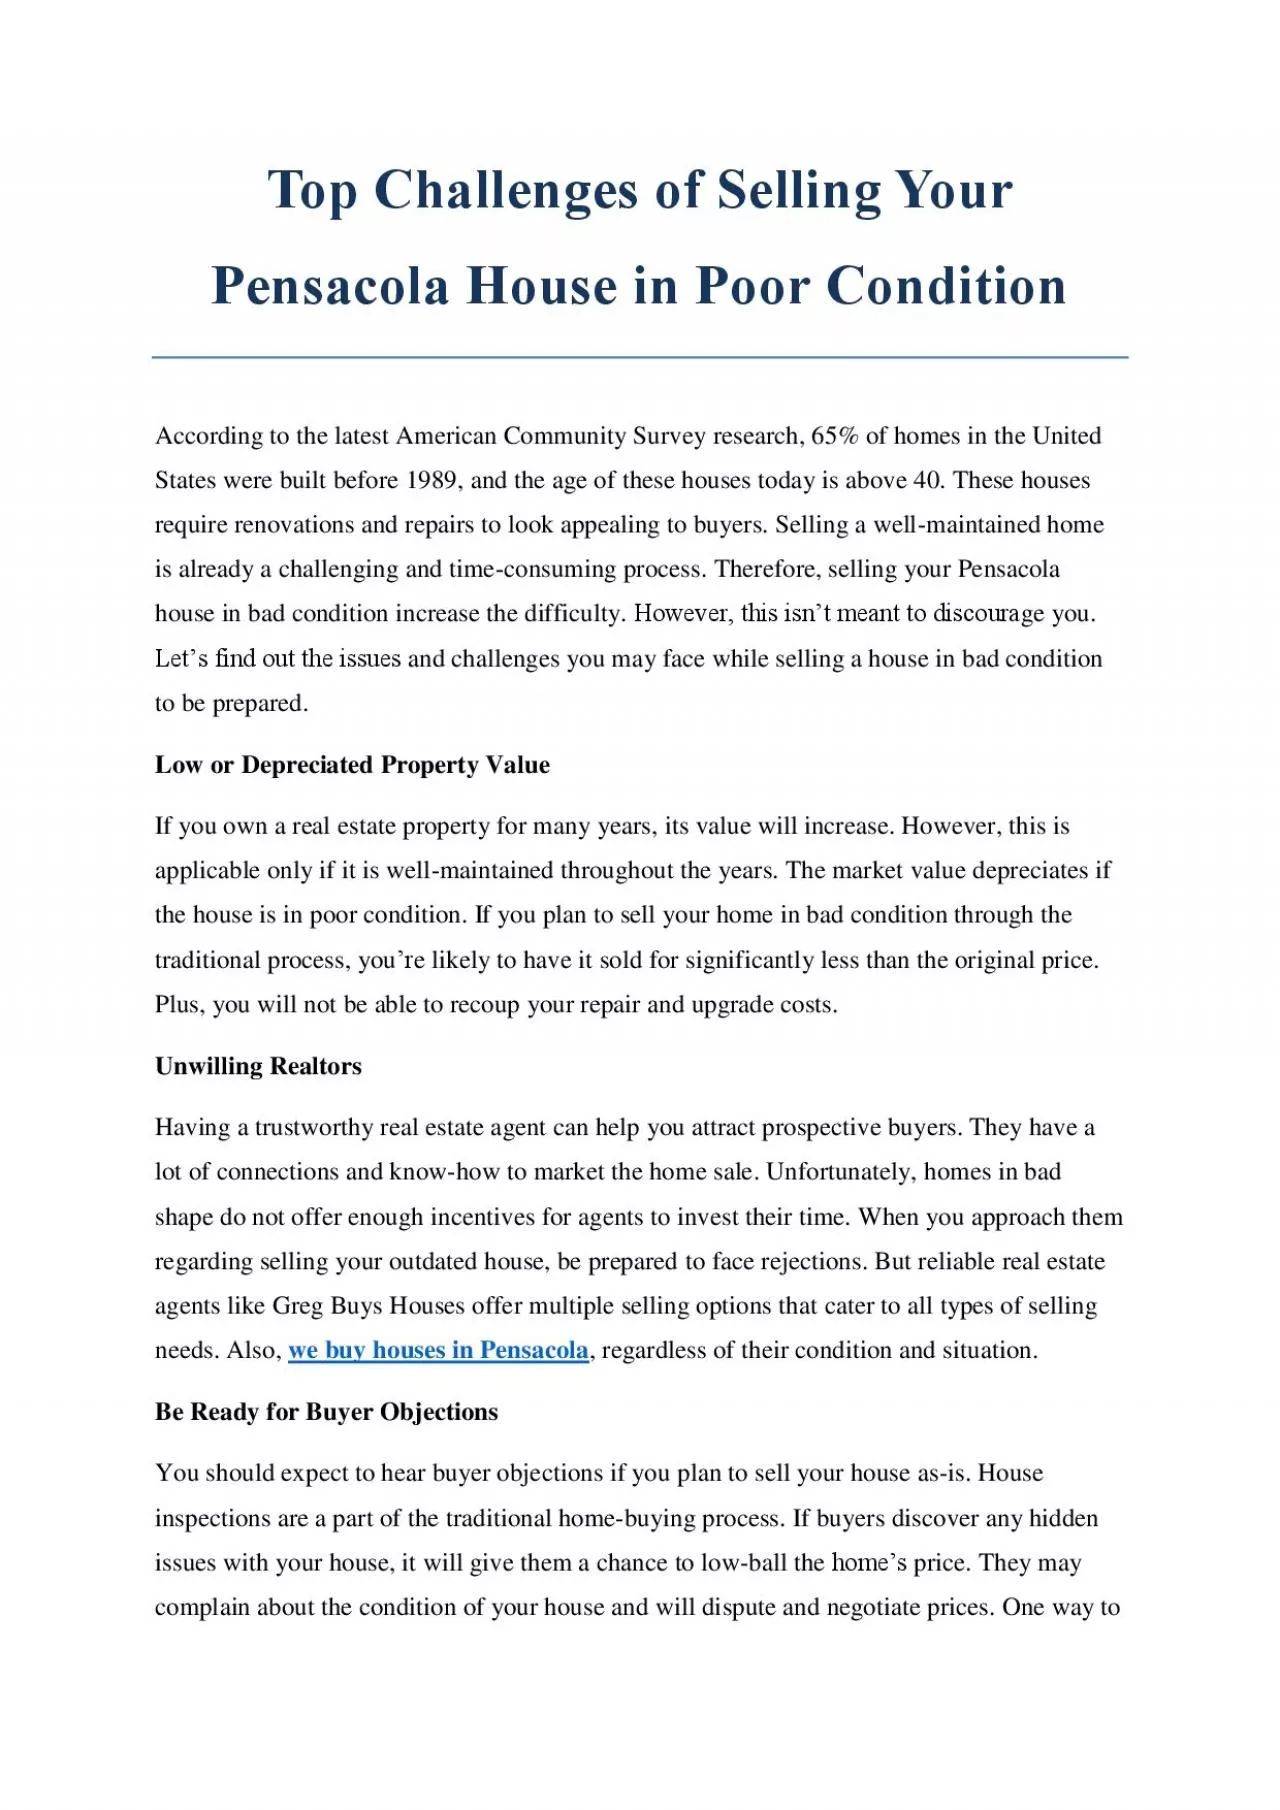 Top Challenges of Selling Your Pensacola House in Poor Condition